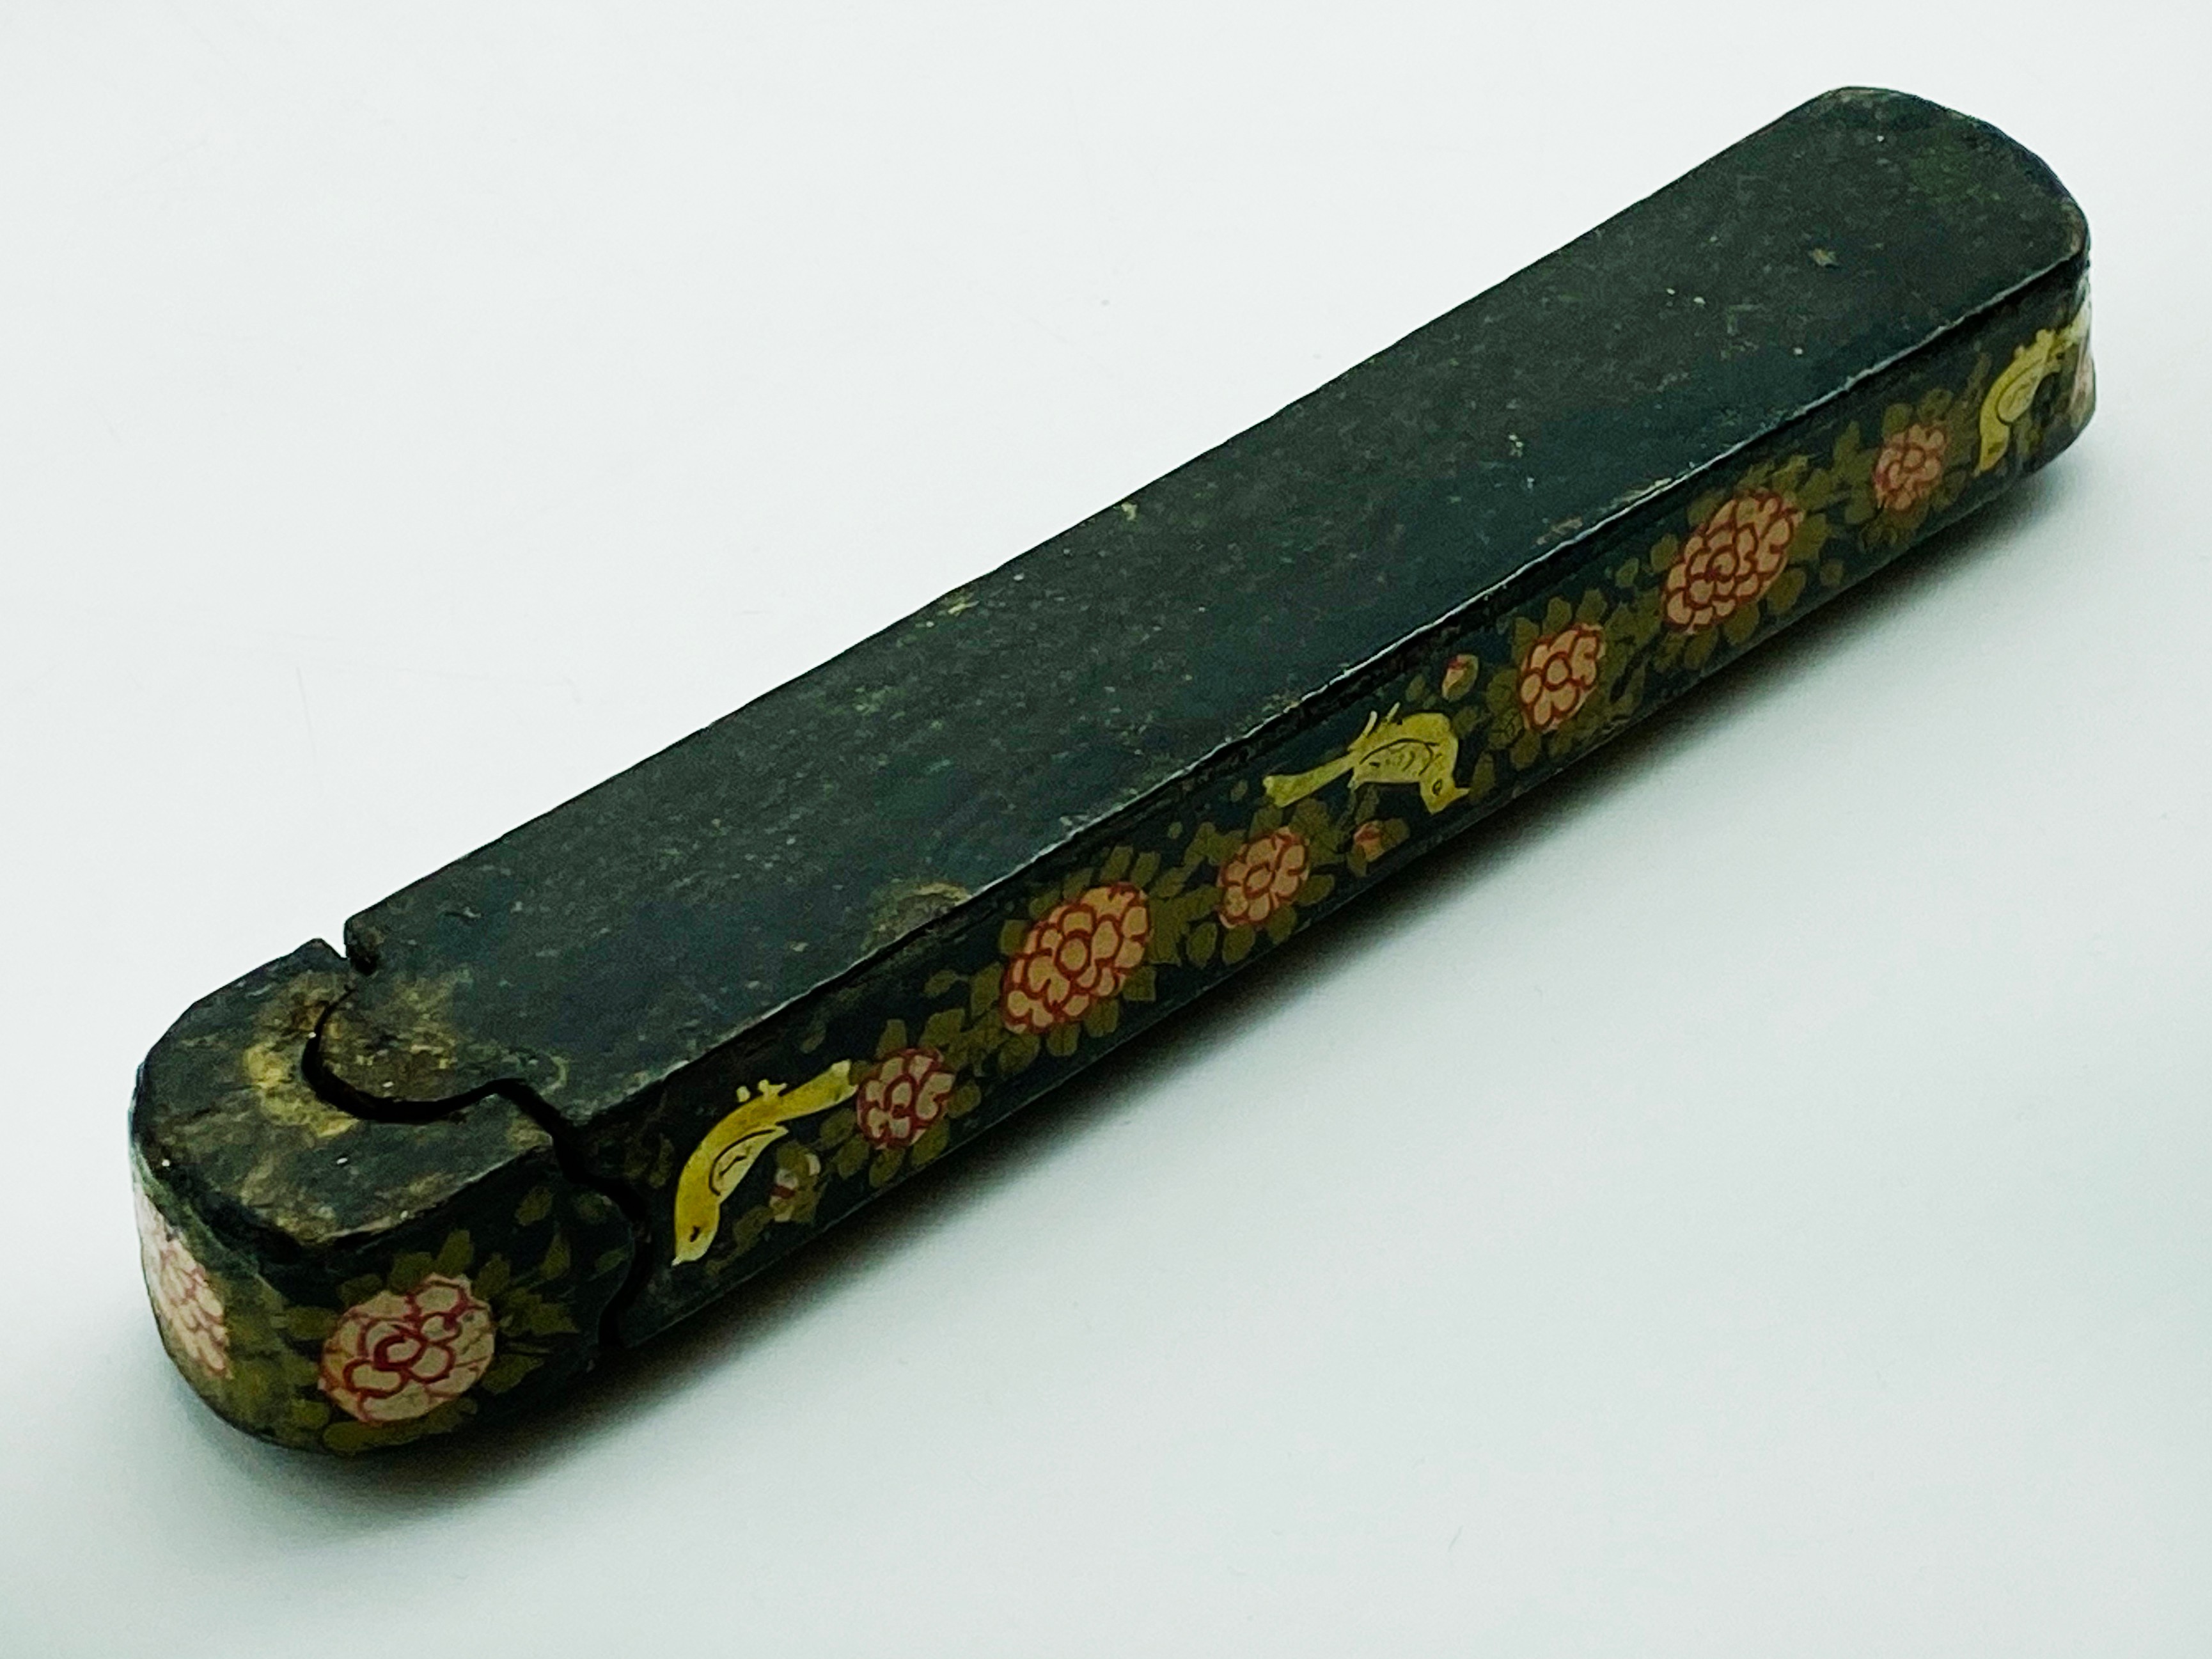 EARLY ISLAMIC PERSIAN PAPER MACHE PEN HOLDER - Image 3 of 4